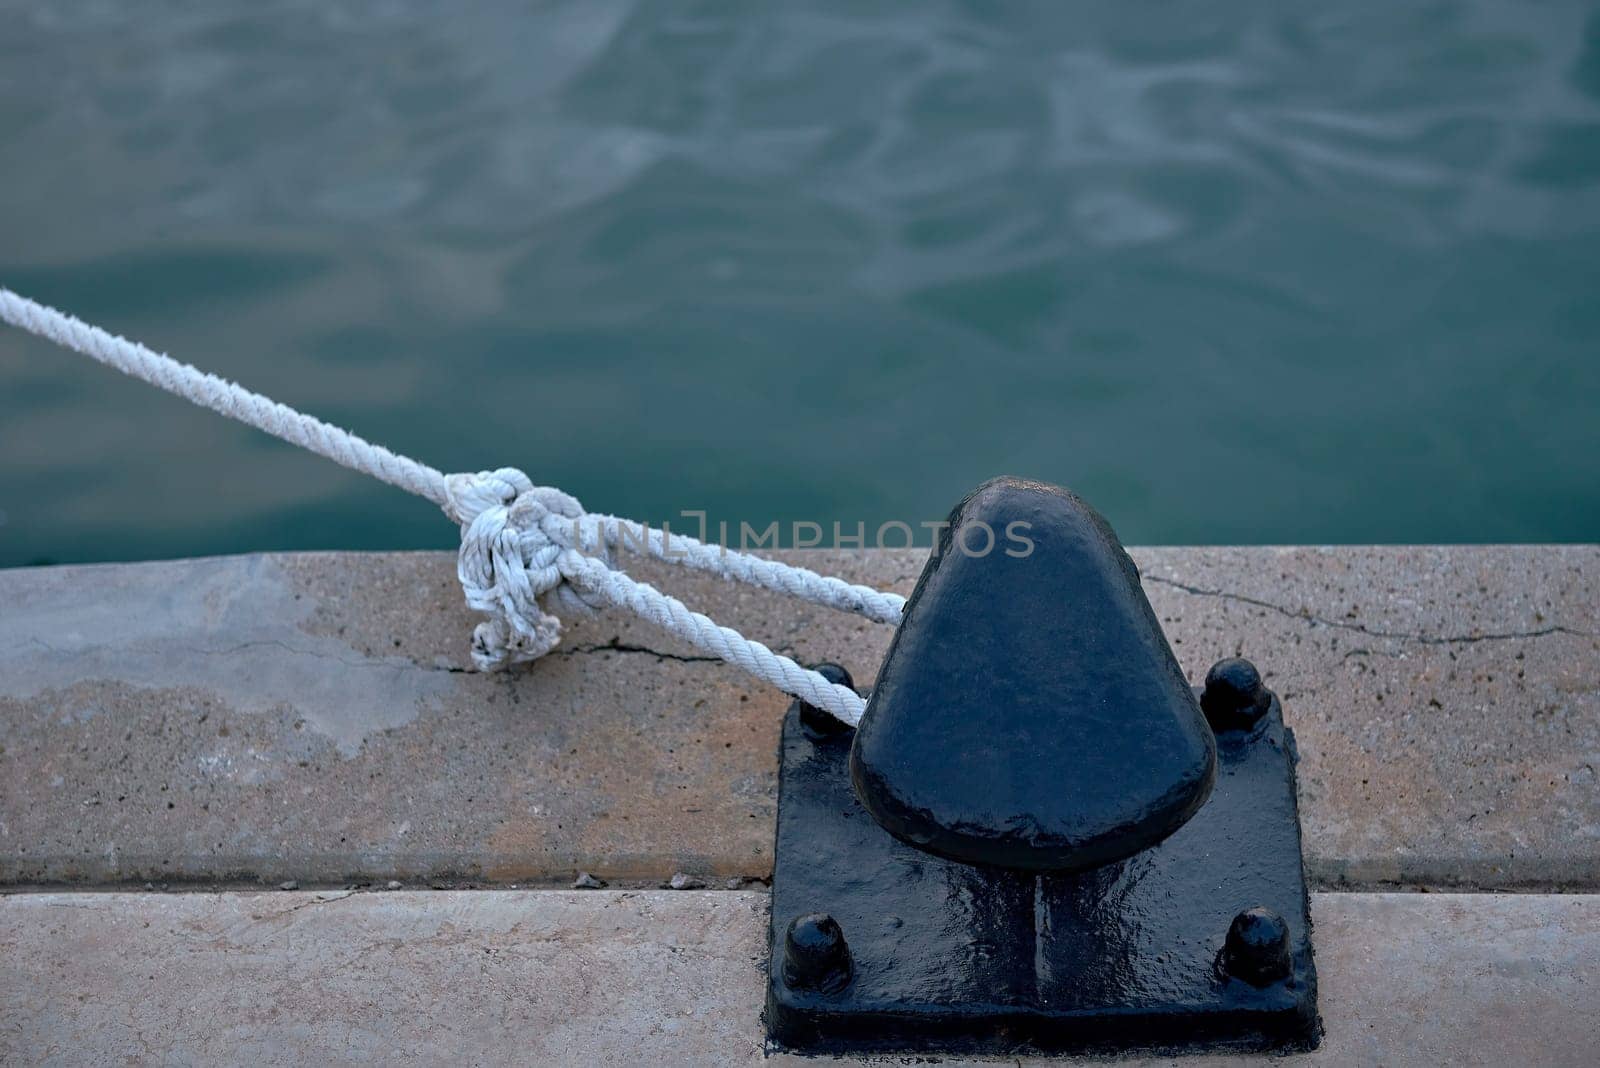 A bollard with a white rope tied to it from a harbour. detail, lineas, solitario, cuerda blanca, colour metallic, mar transparent